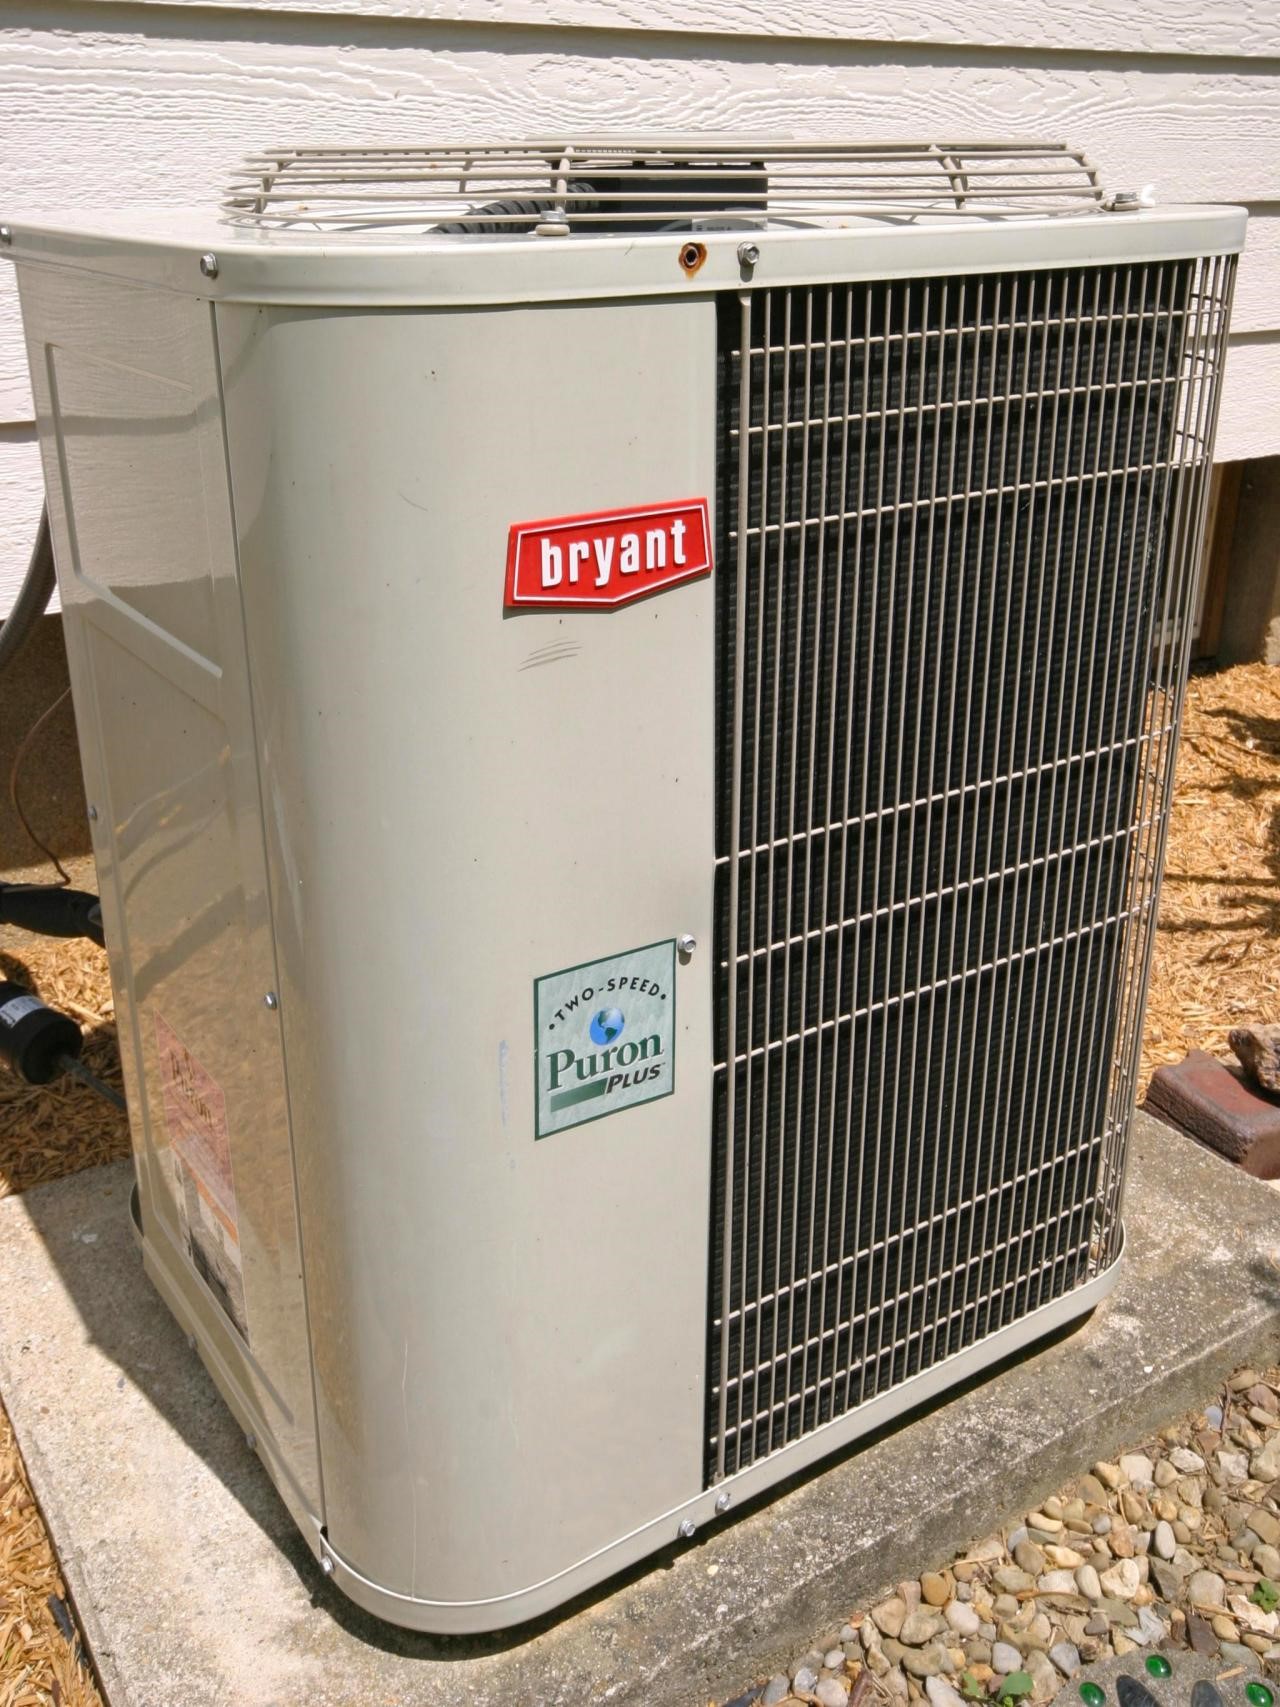 A 1 Heating And Air Conditioning Greeley Co